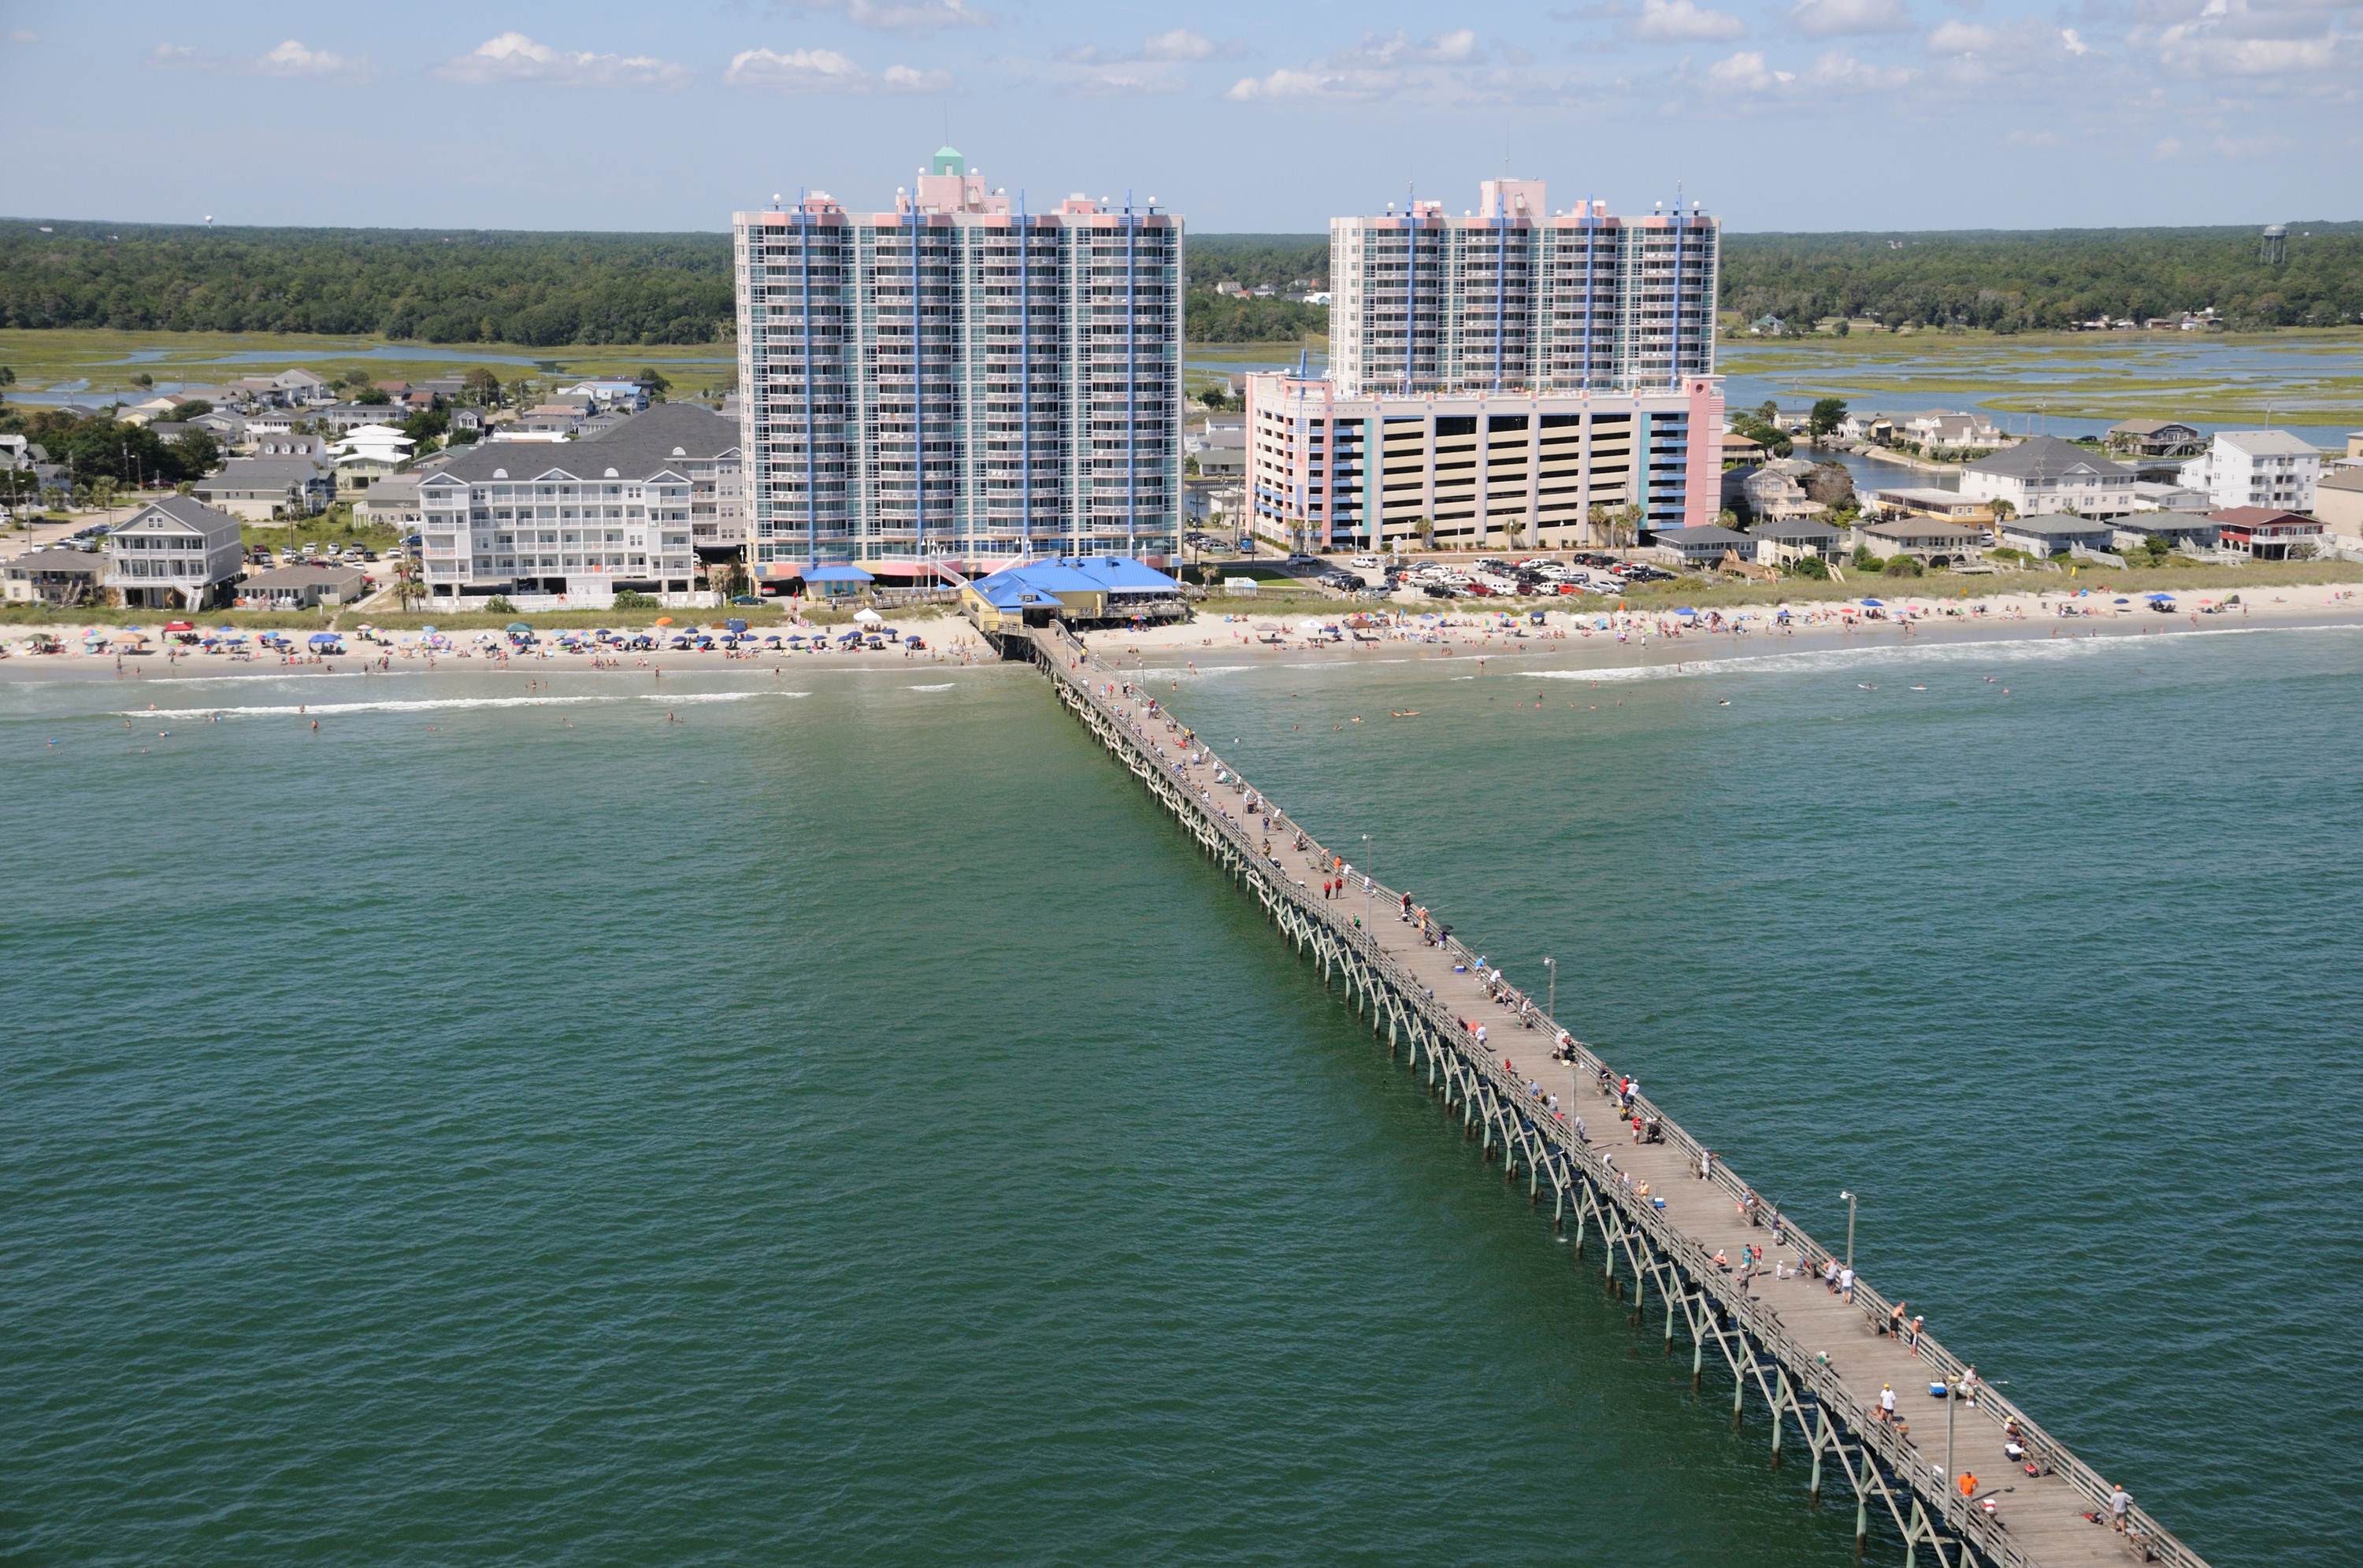 Prince Resort in North Myrtle Beach is always a favorite destination for vacationers.